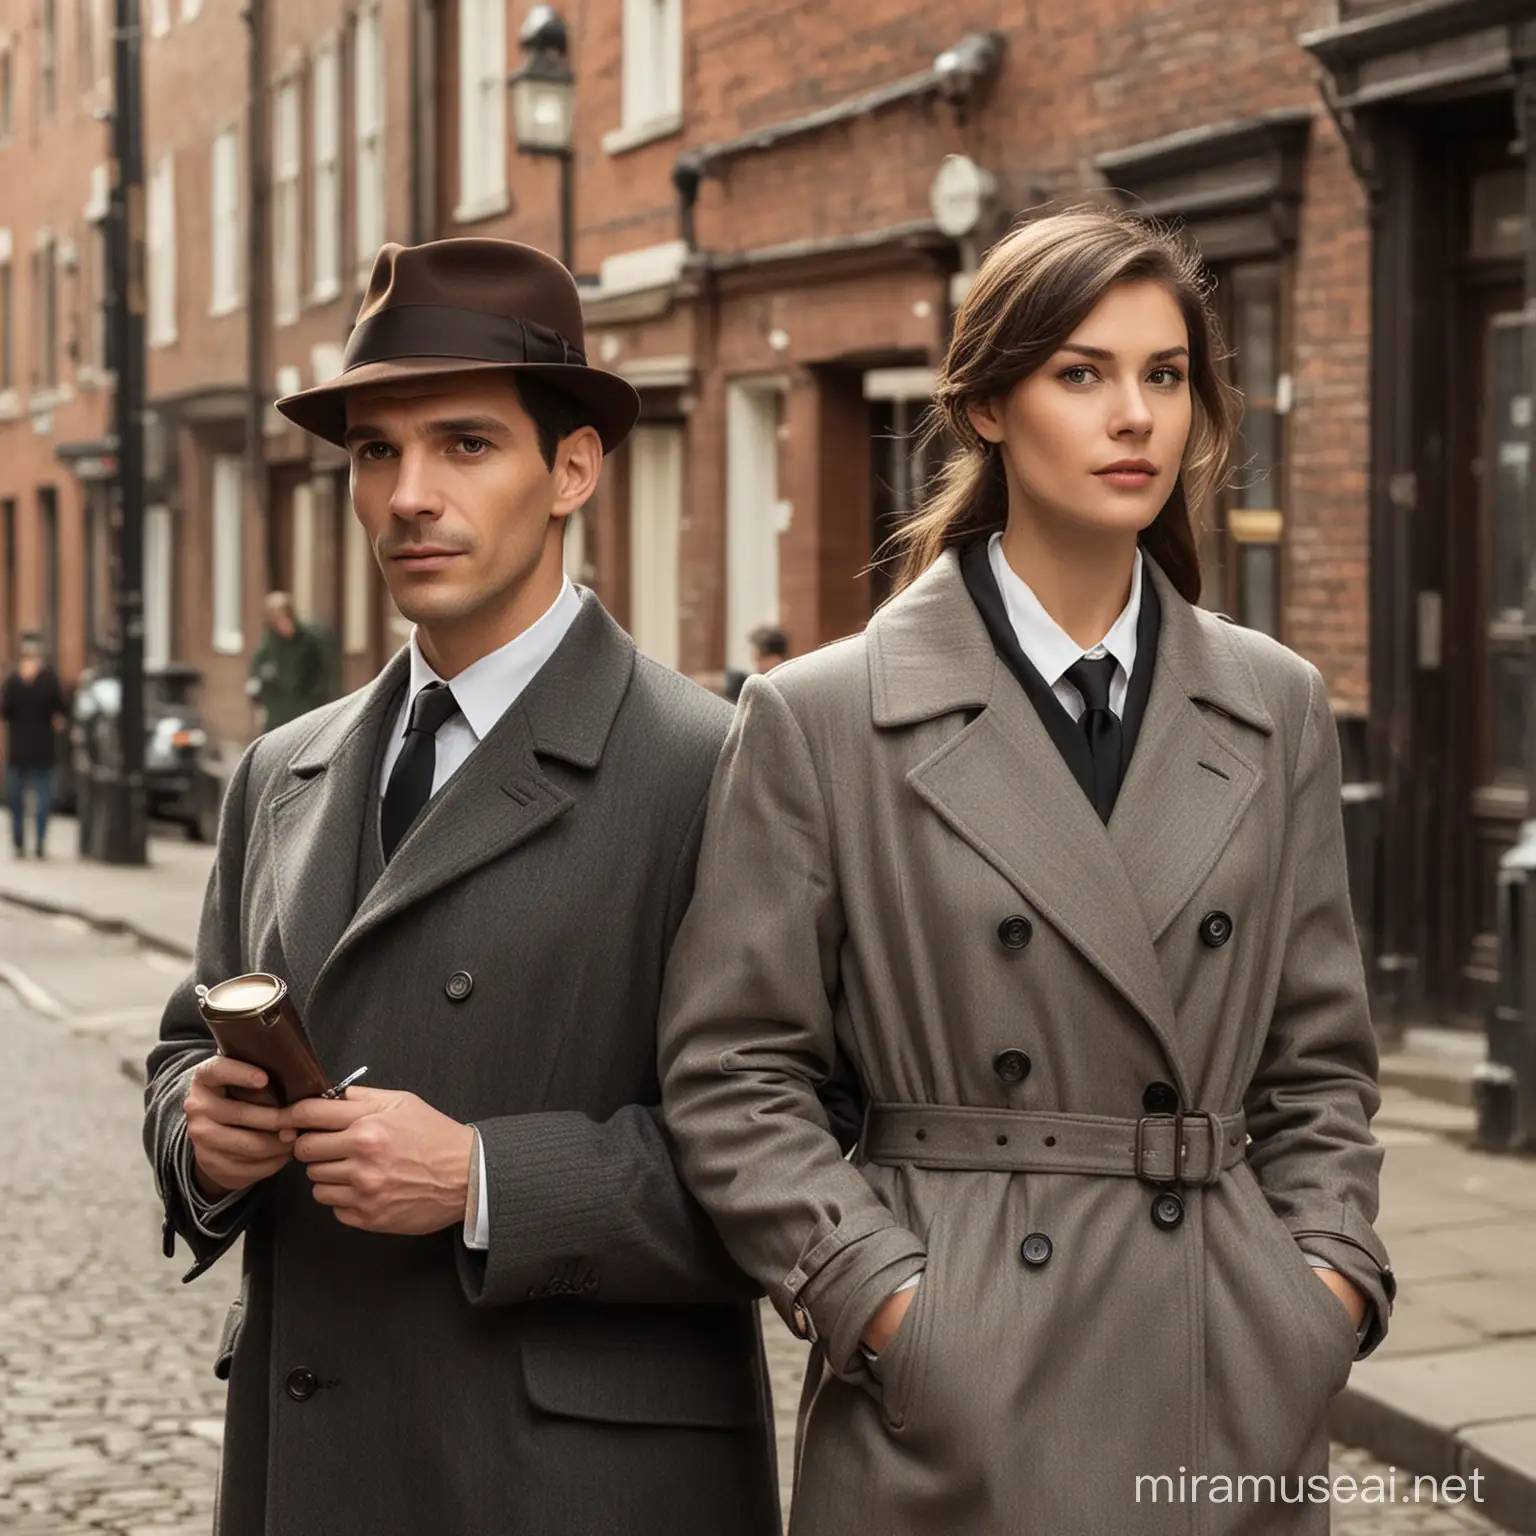 Classic Detective Duo Male and Female Partners Investigating